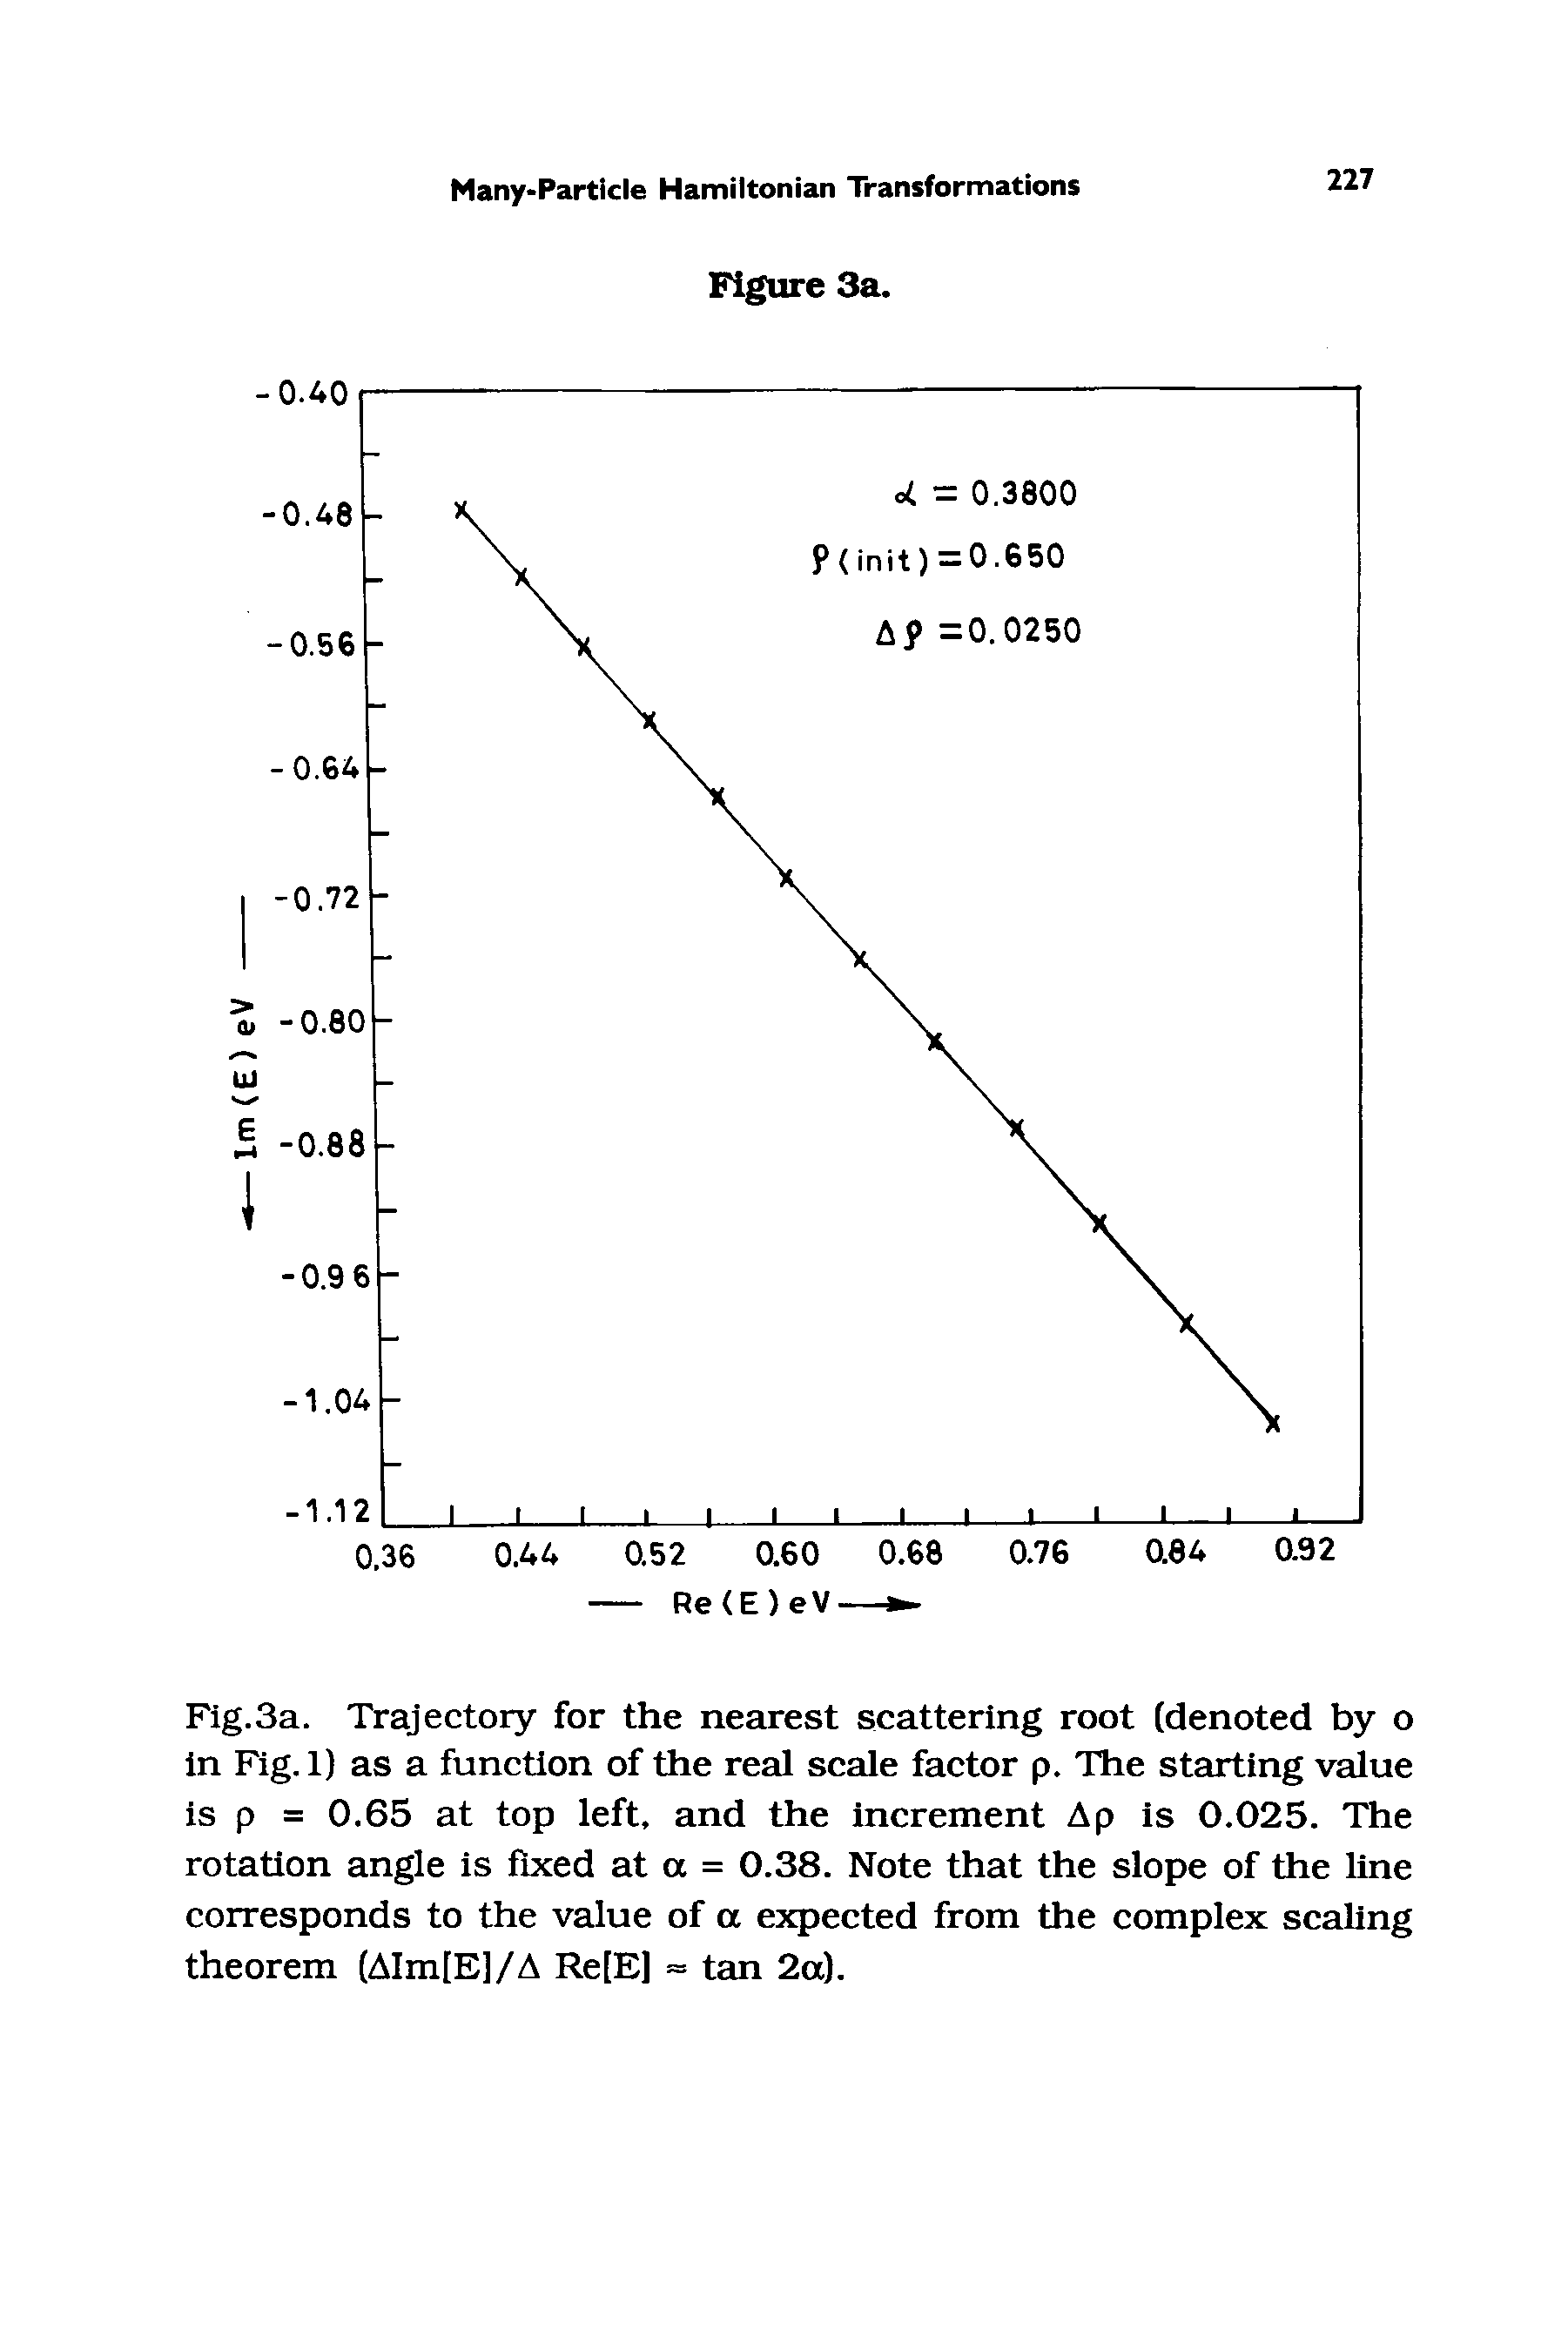 Fig.3a. Trajectory for the nearest scattering root (denoted by o in Fig. 1) as a function of the real scale factor p. The starting value is p = 0.65 at top left, and the increment Ap is 0.025. The rotation angle is fixed at a = 0.38. Note that the slope of the line corresponds to the value of a expected from the complex scaling theorem (AIm[E]/A Re[E] = tan 2a).